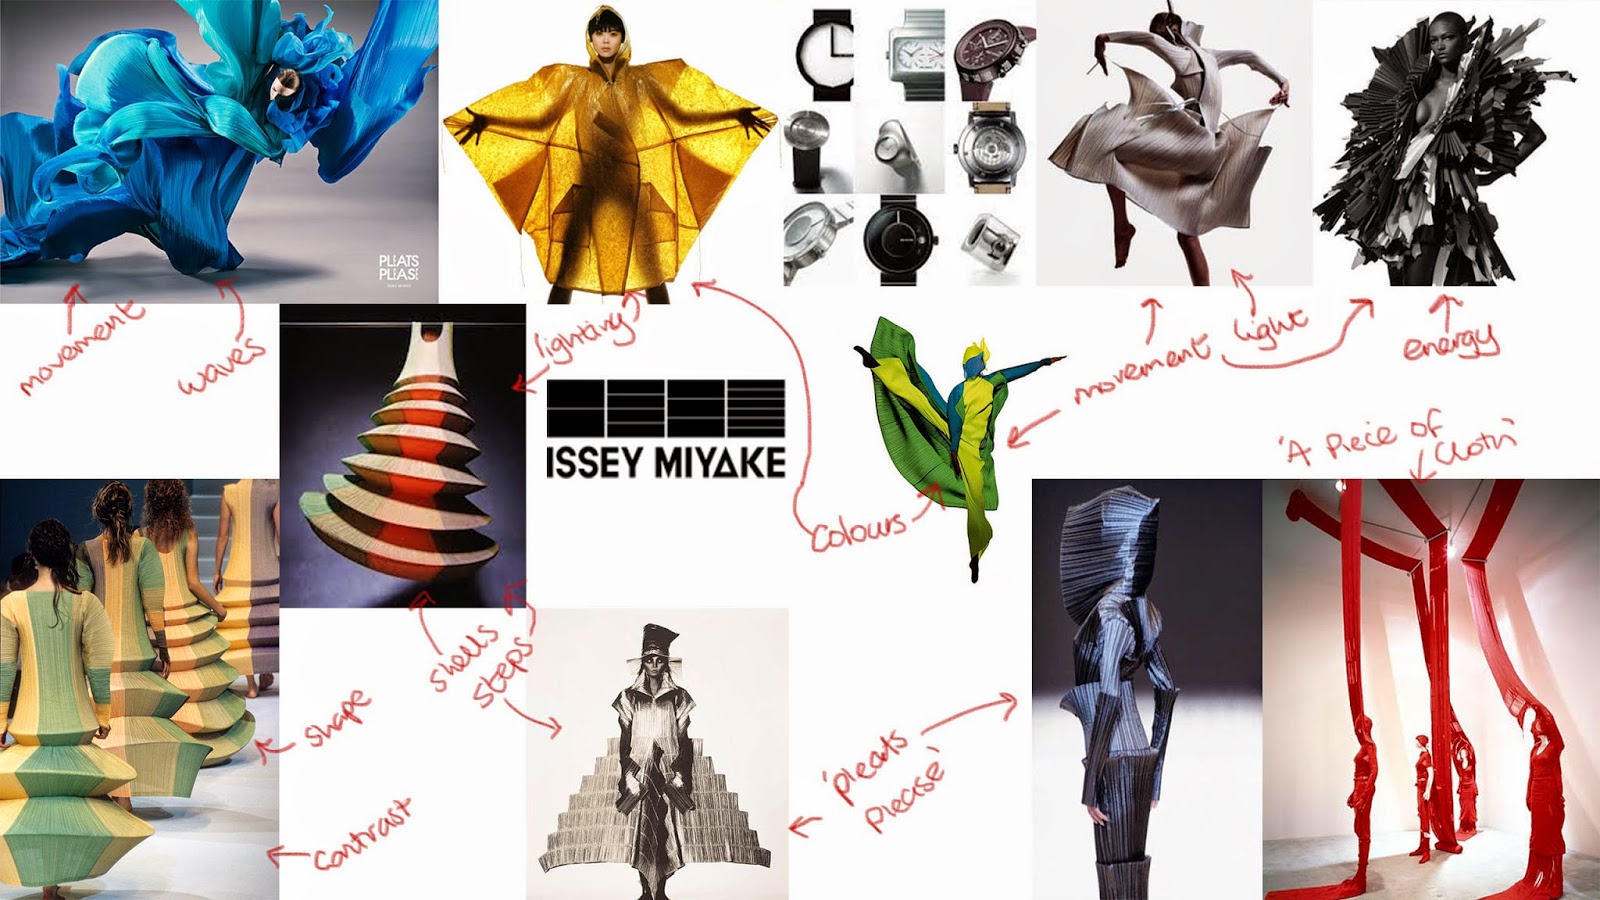 Emma Morley: Issey Miyake initial research